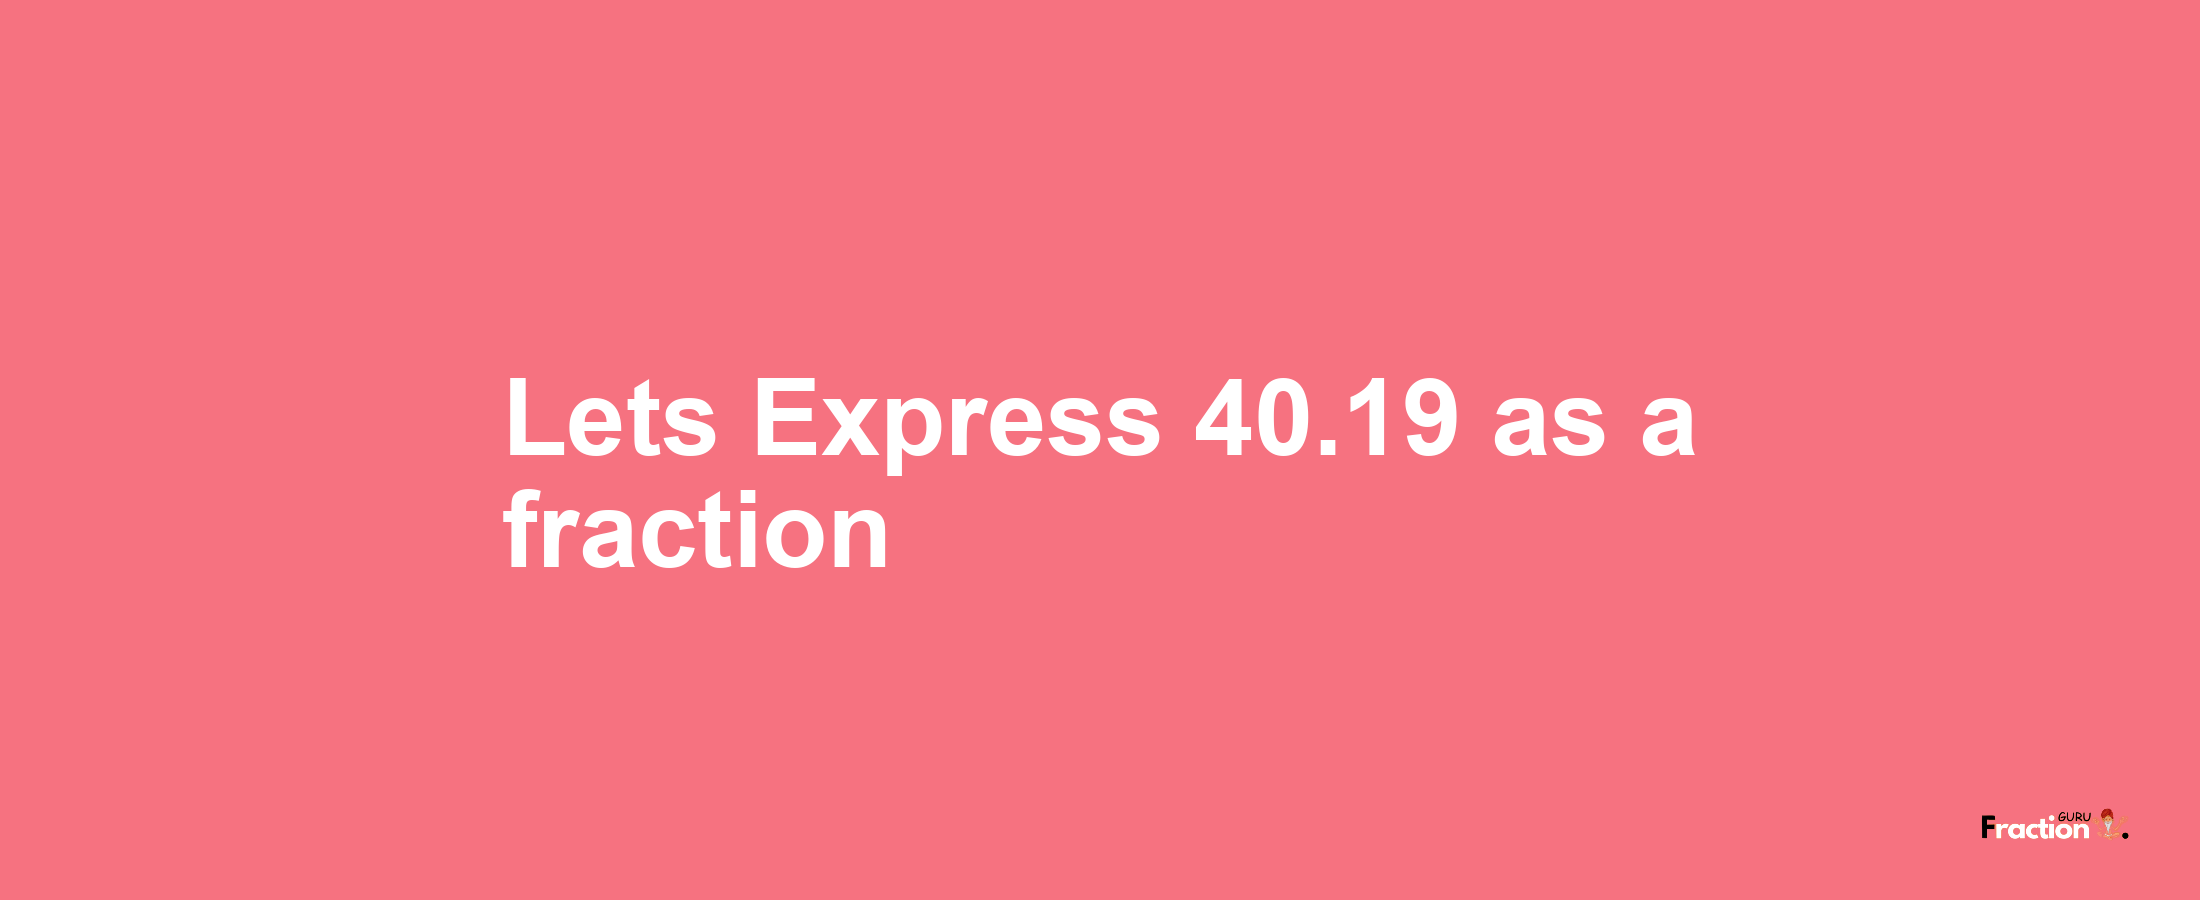 Lets Express 40.19 as afraction